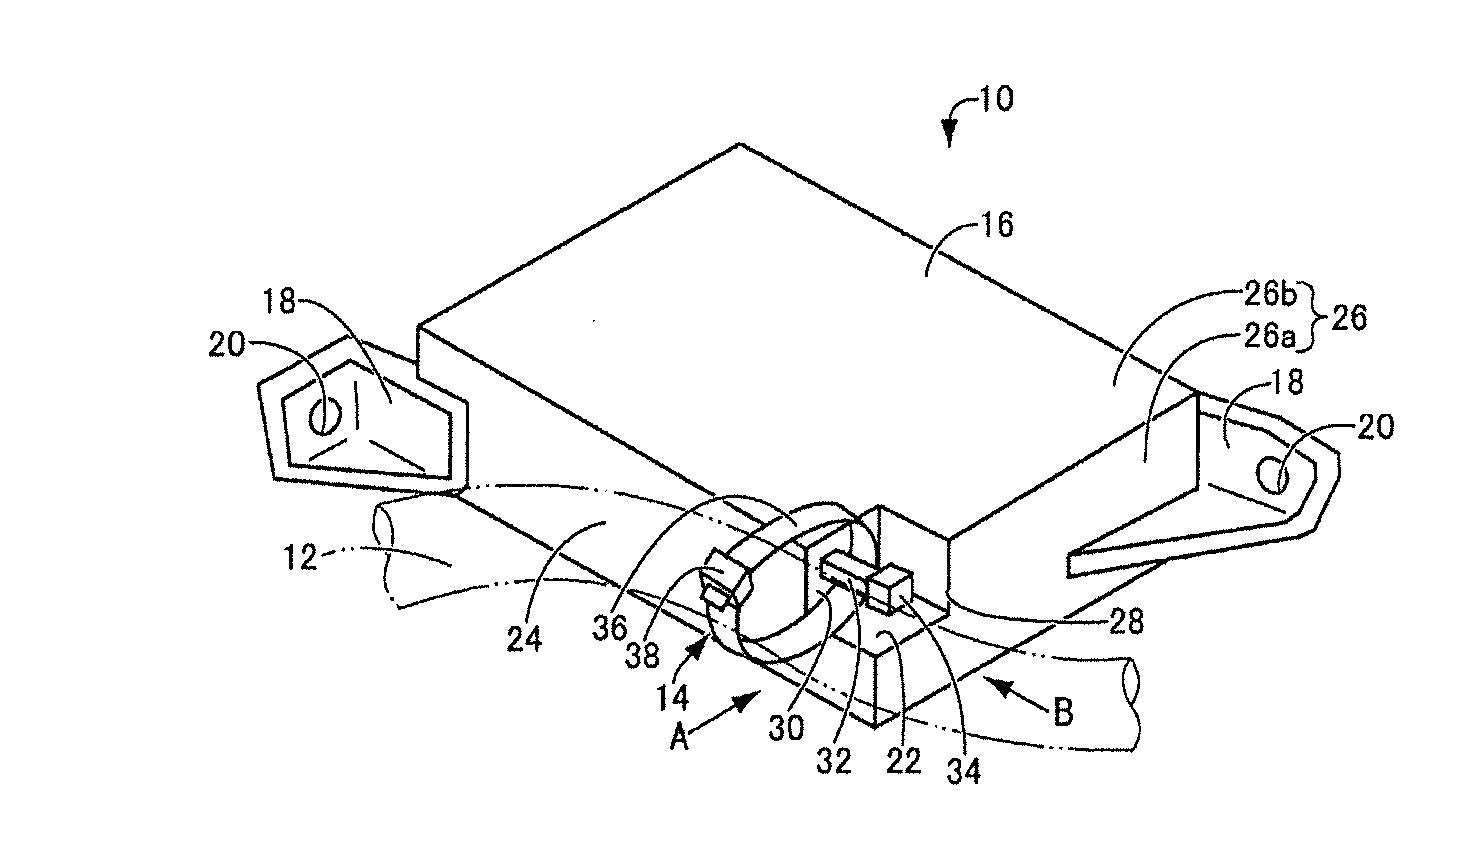 Attachment structure for binding band